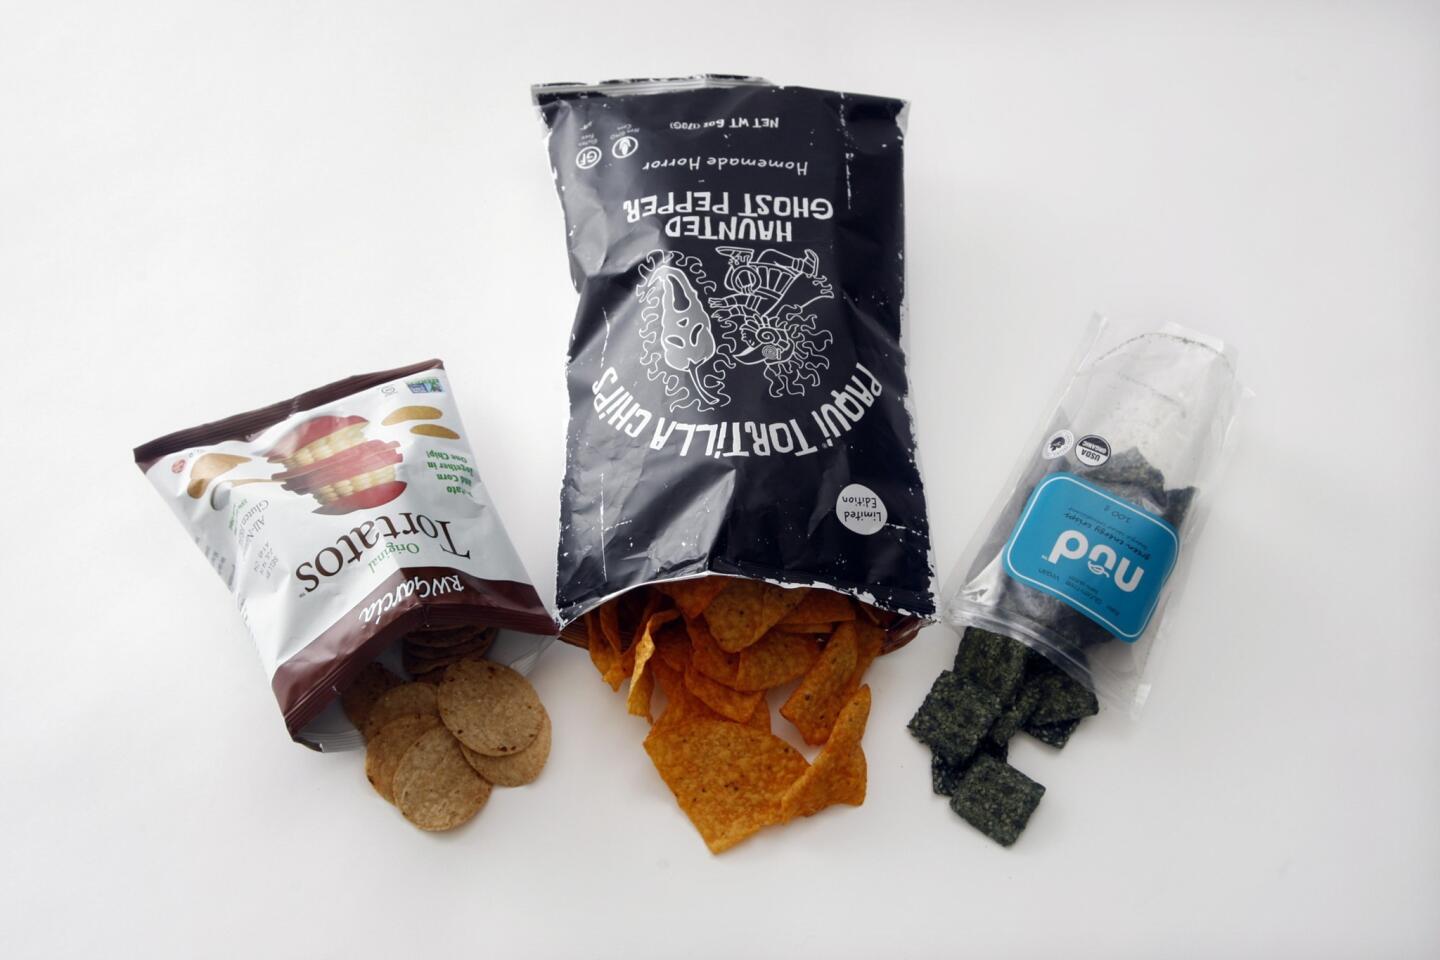 Given market research showing that more people are replacing lunch with snacks, efforts to up our nutritional snacking game are a plus, which isn't to say they're a replacement for broccoli. Look for chips with pea flour, seaweed and other vegetables, not just potatoes or corn. Supereats chips all have kale as the first ingredient. Nud Fud's green chips are made from bananas, coconut, sesame and spirulina. R.W. Garcia found a tasty combination with Tortatos, a corn and potato combination. Good Boy Organics from the Finger Lakes region of New York had Organicasaurus: baked organic corn snacks in dinosaur shapes. Beanitos brought out puffs in cheddar and hot chili to add to its line of bean chips. Popcorn appeared in many guises, including 100-calorie bags from Skinny Pop and Half Pops kernels.